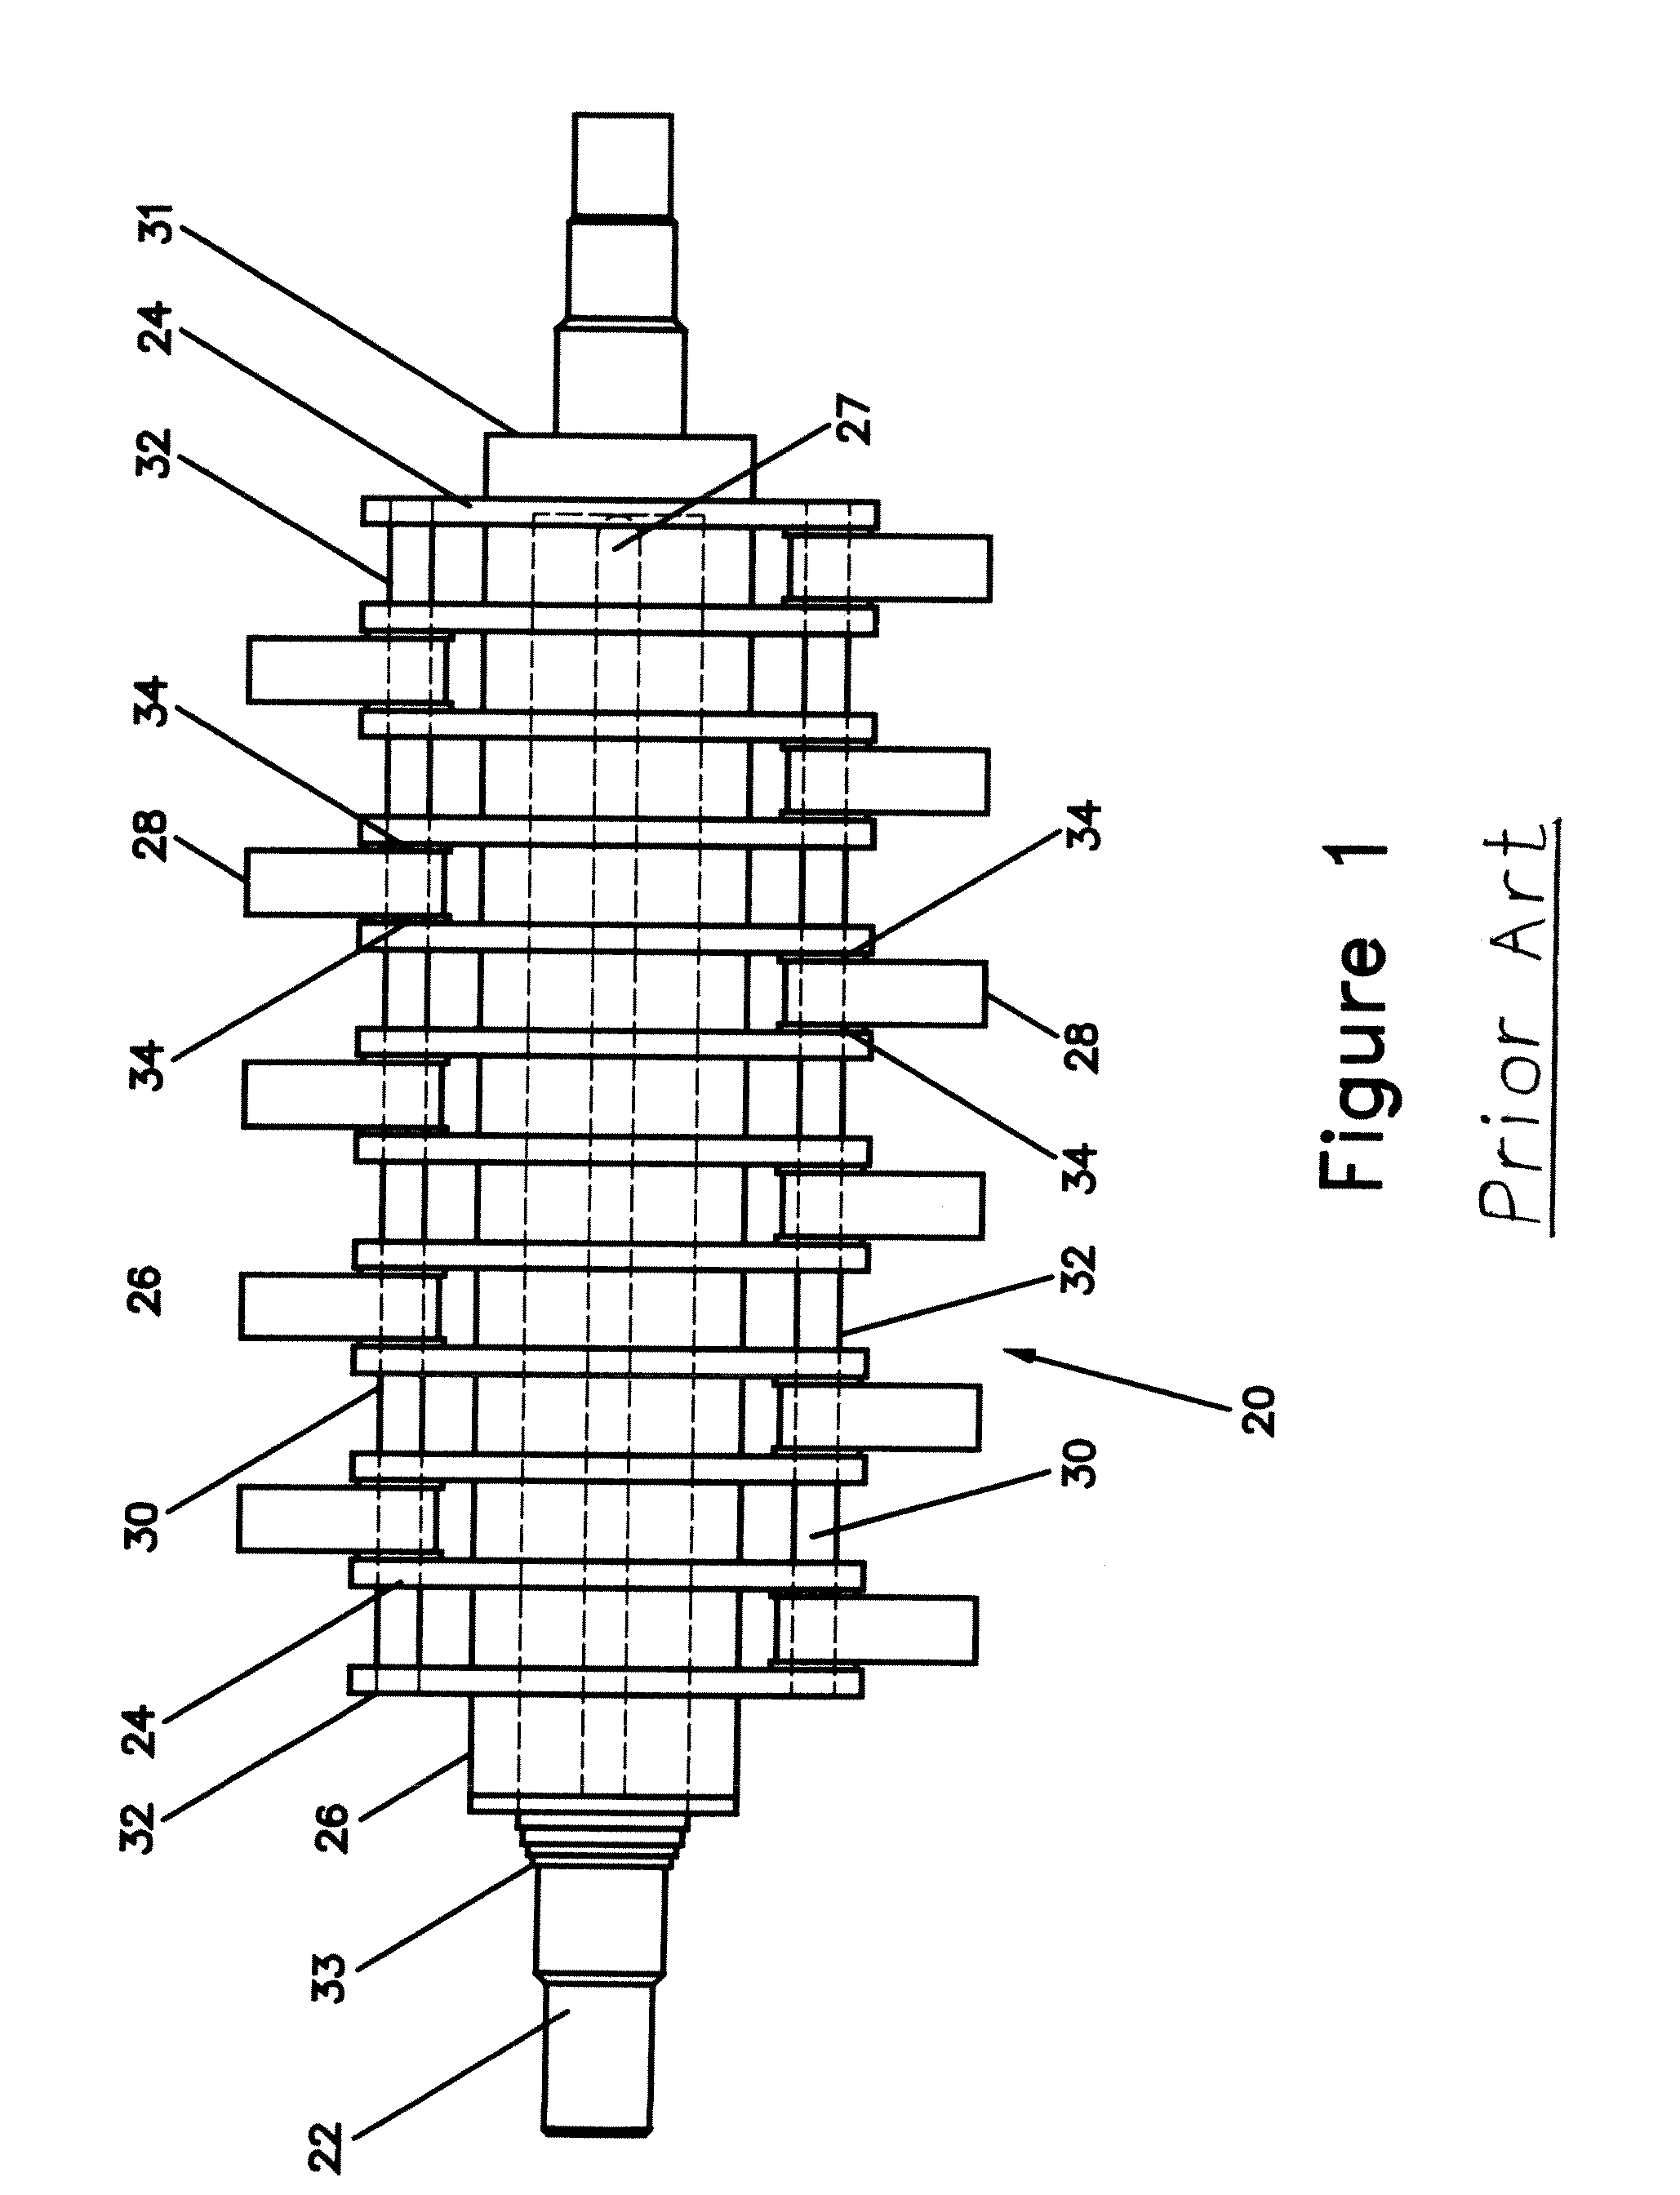 Hammer for a material size reduction machine